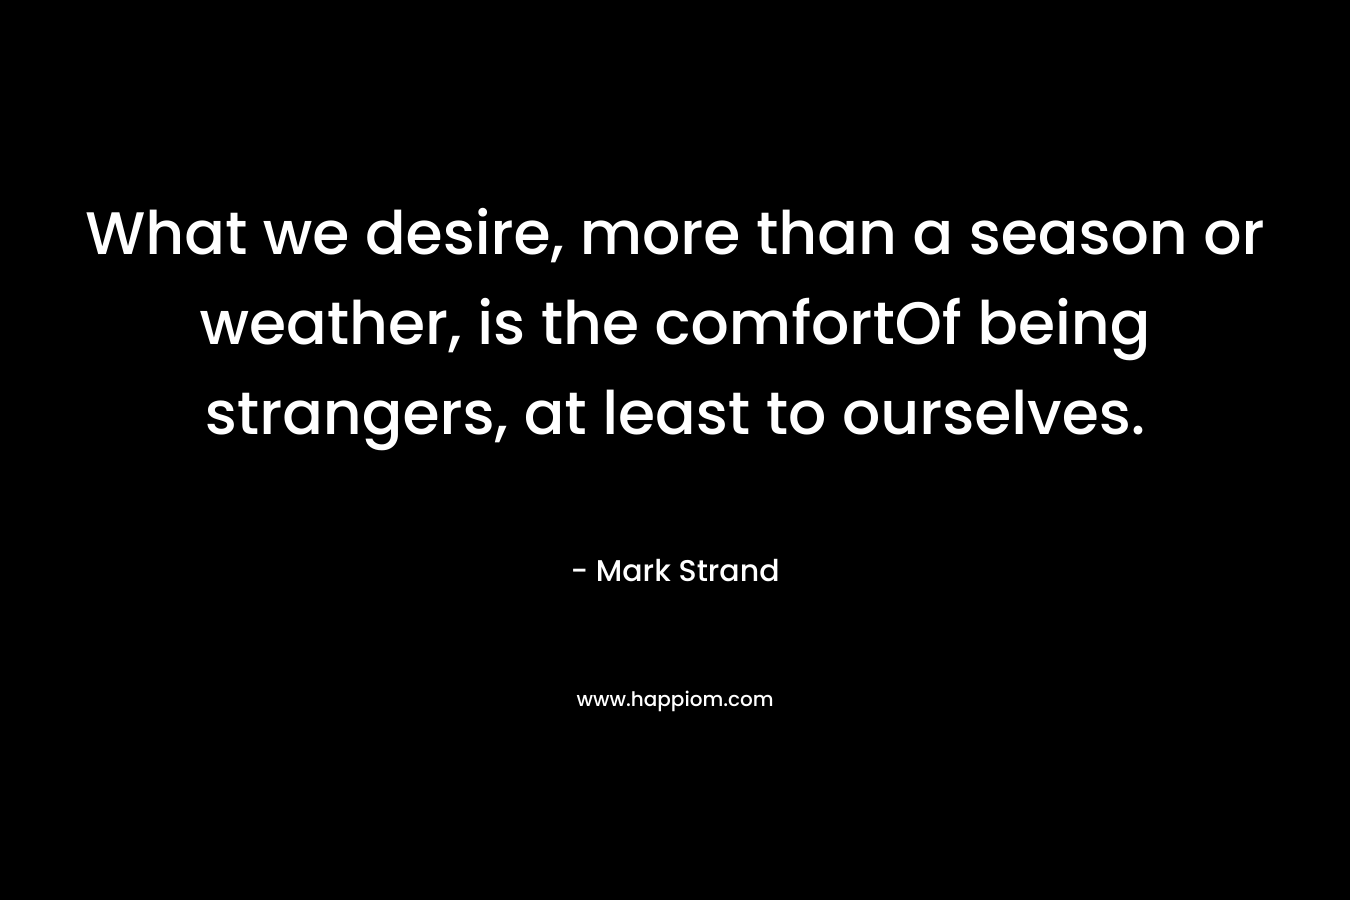 What we desire, more than a season or weather, is the comfortOf being strangers, at least to ourselves.